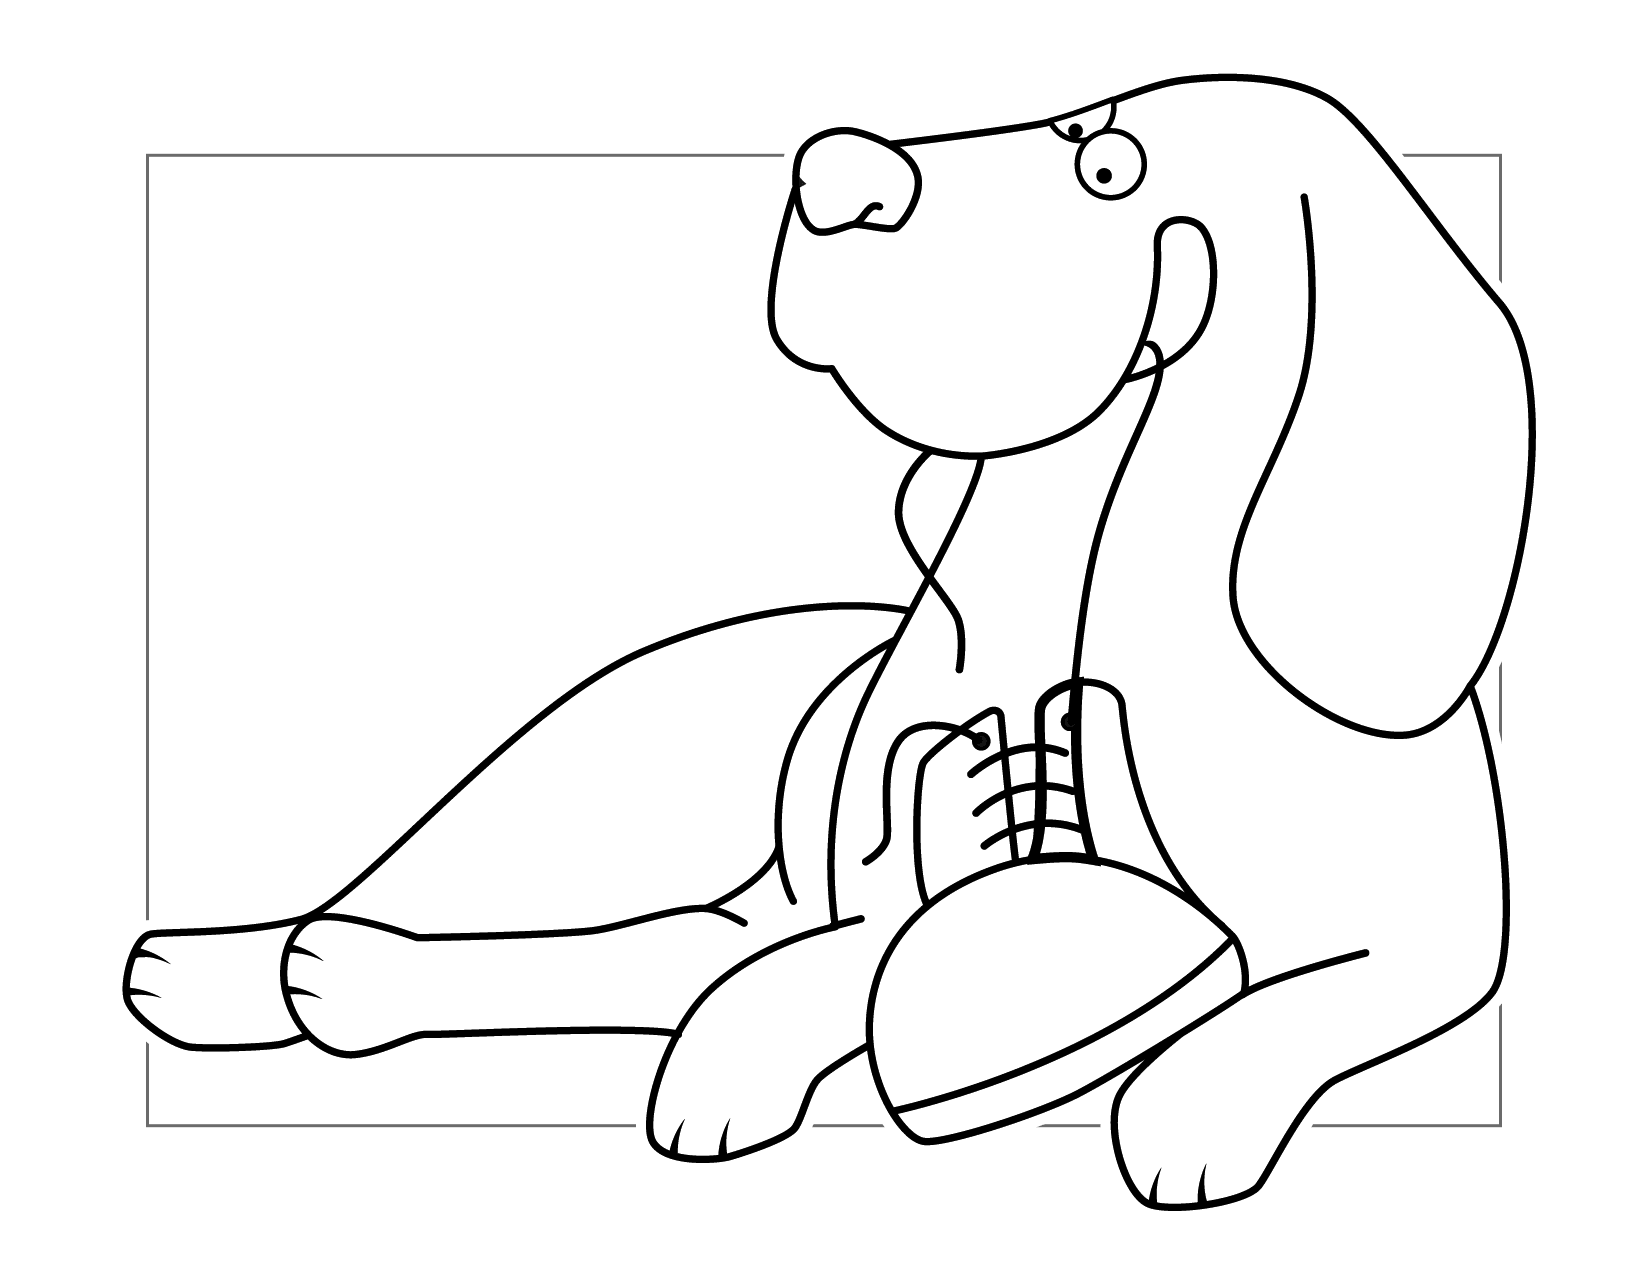 Funny Dog Eating A Shoe Coloring Page